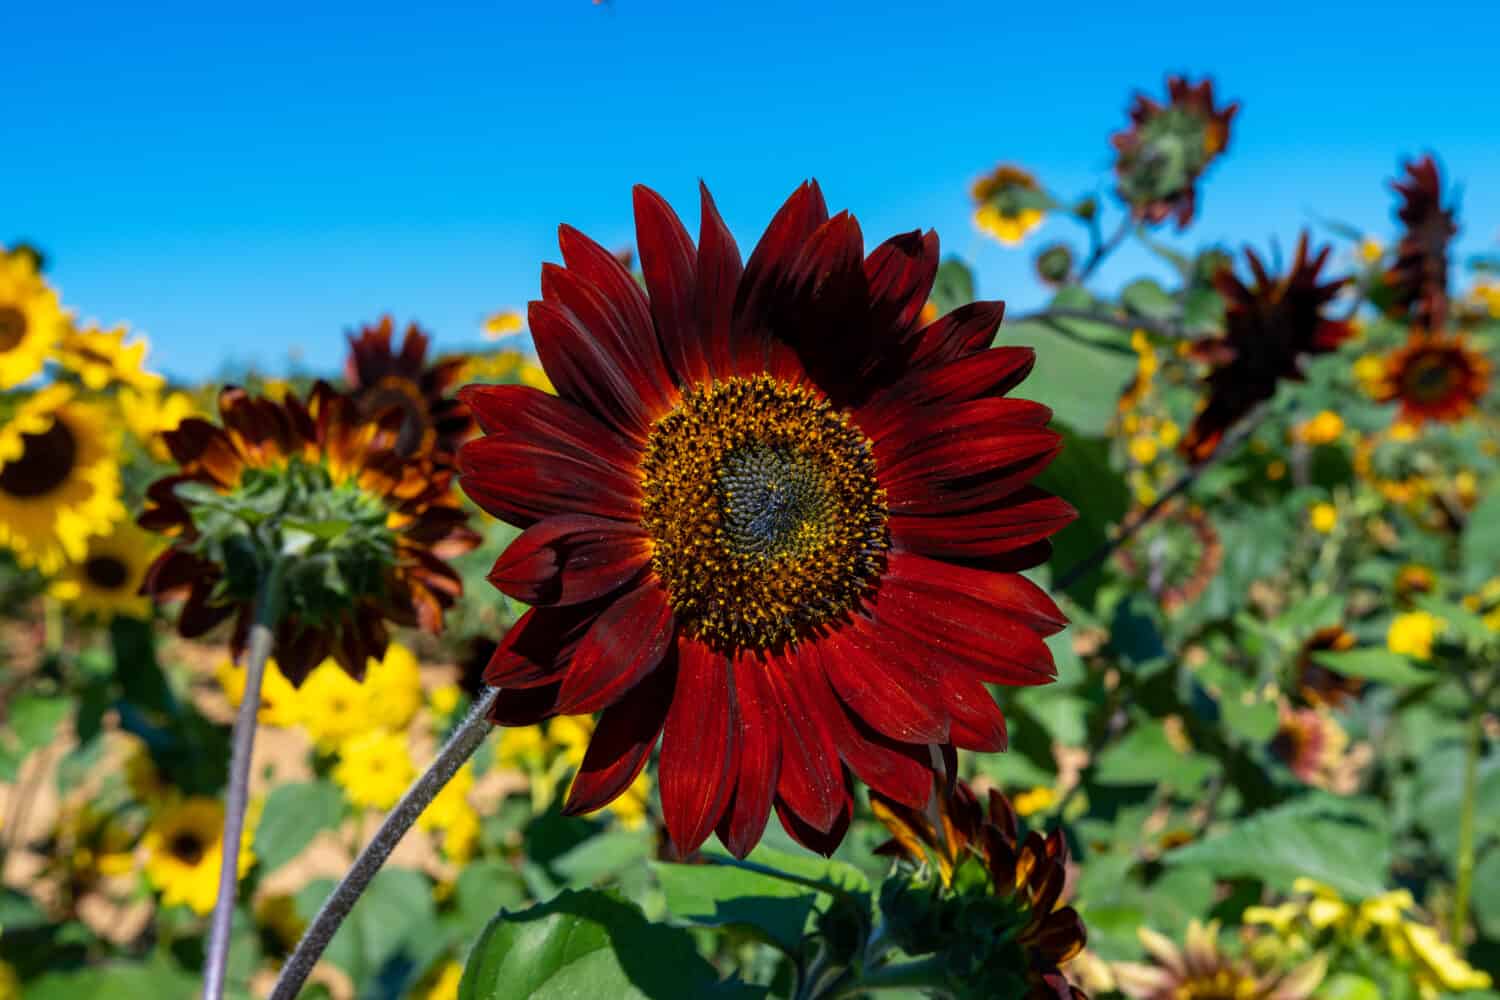 brown sunflo ripe sunflower in brown color